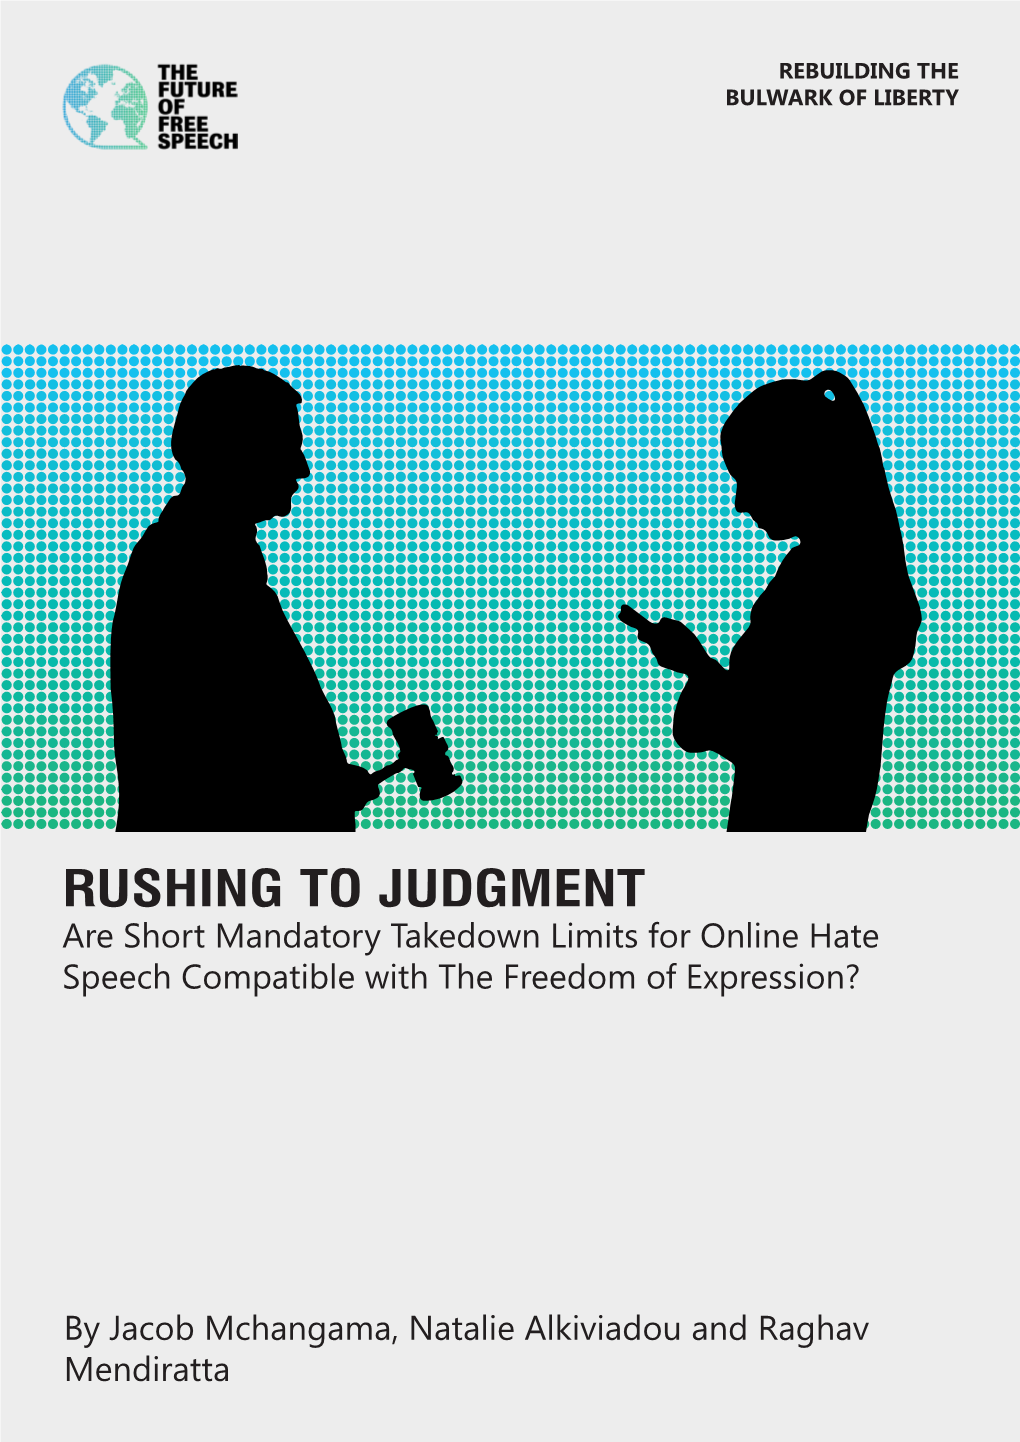 RUSHING to JUDGMENT Are Short Mandatory Takedown Limits for Online Hate Speech Compatible with the Freedom of Expression?